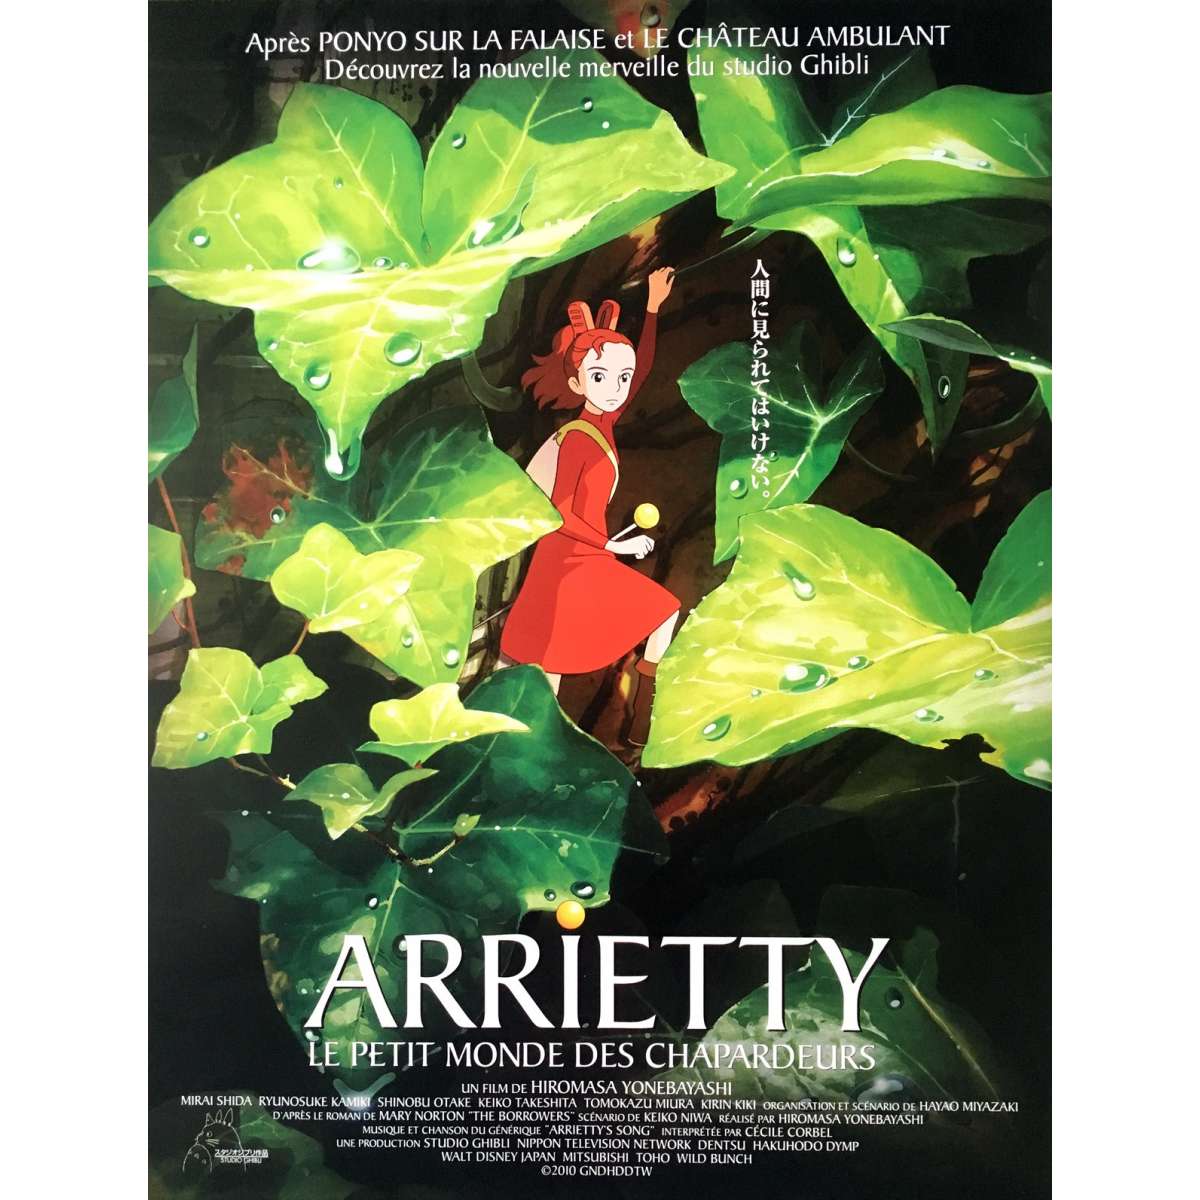 THE SECRET WORLD OF ARRIETTY Movie Poster 15x21 in.